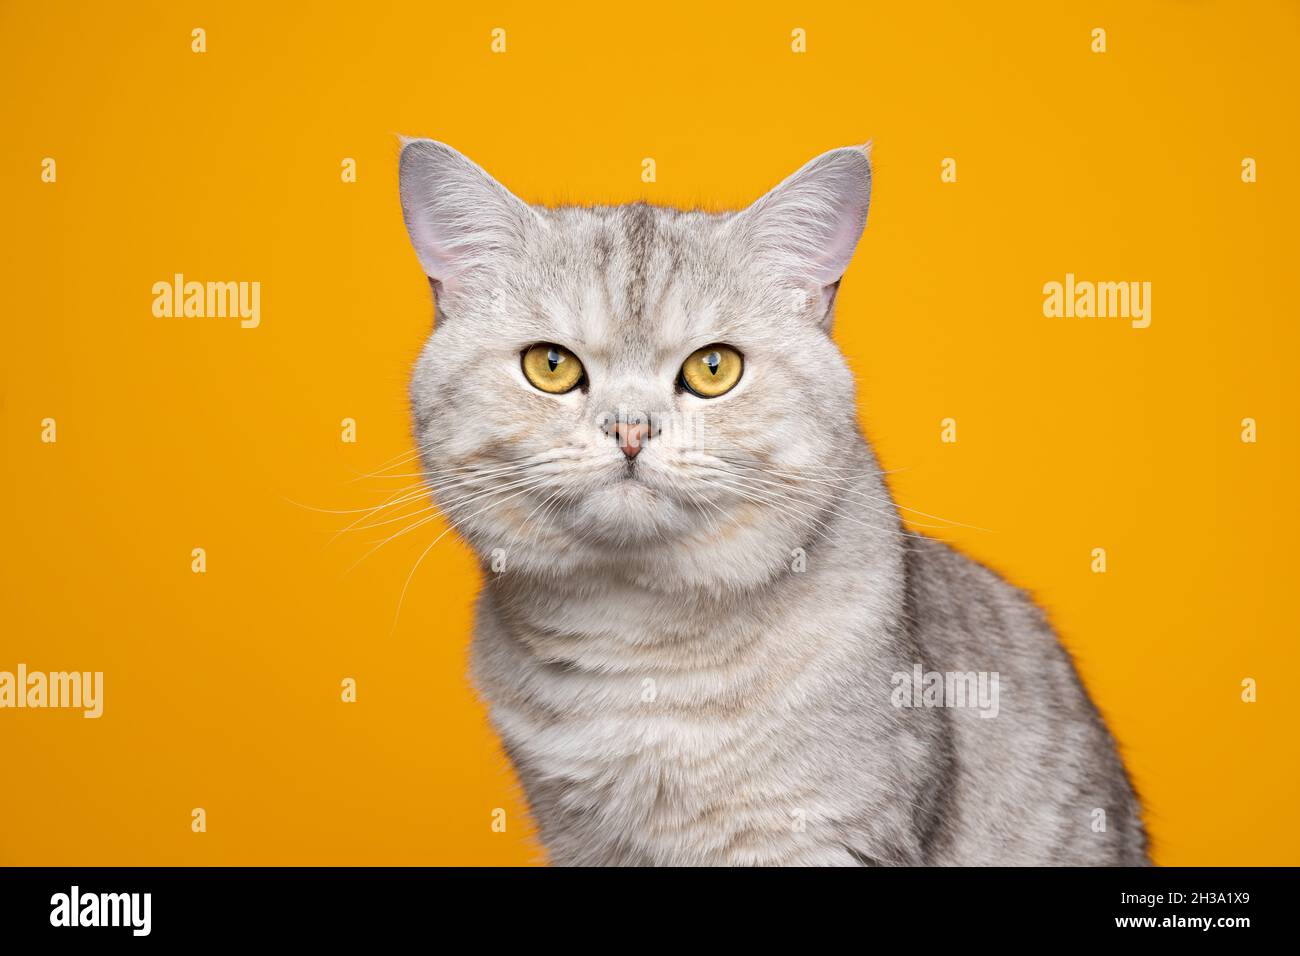 beautiful silver tabby shaded british shorthair cat looking at camera portrait on yellow background with copy space Stock Photo